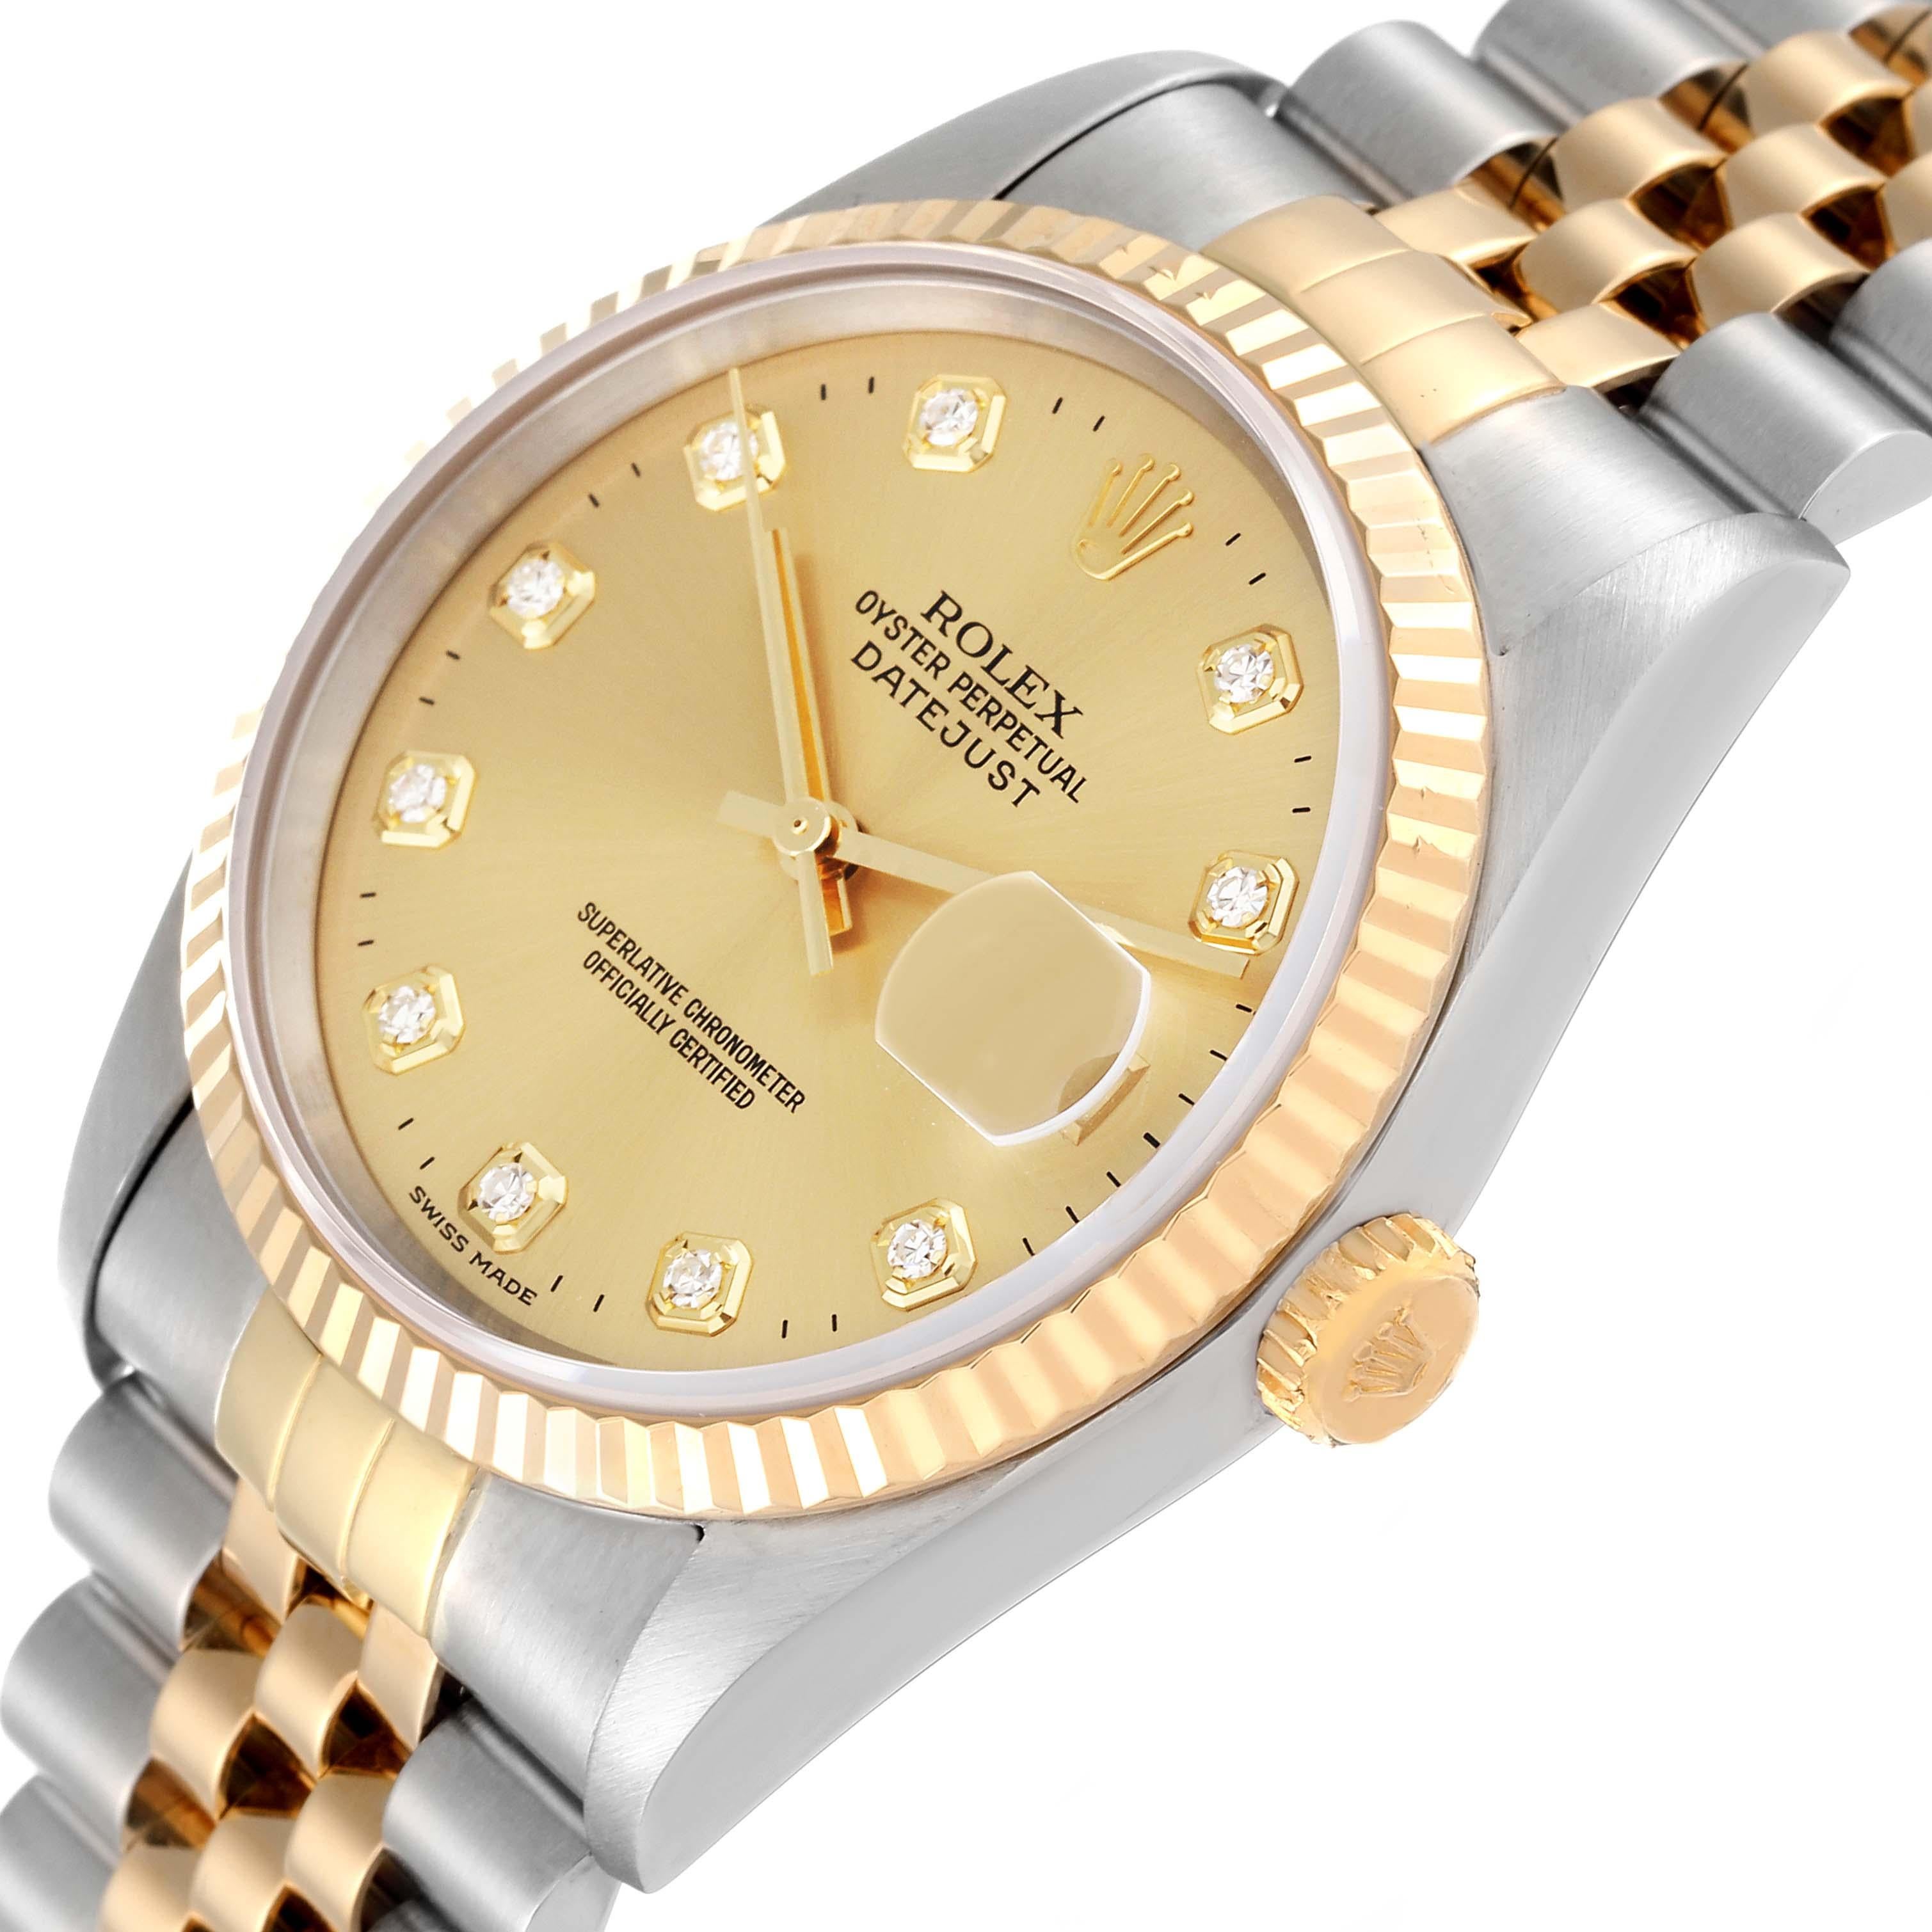 Rolex Datejust Steel Yellow Gold Diamond Dial Mens Watch 16233 Box Papers 1